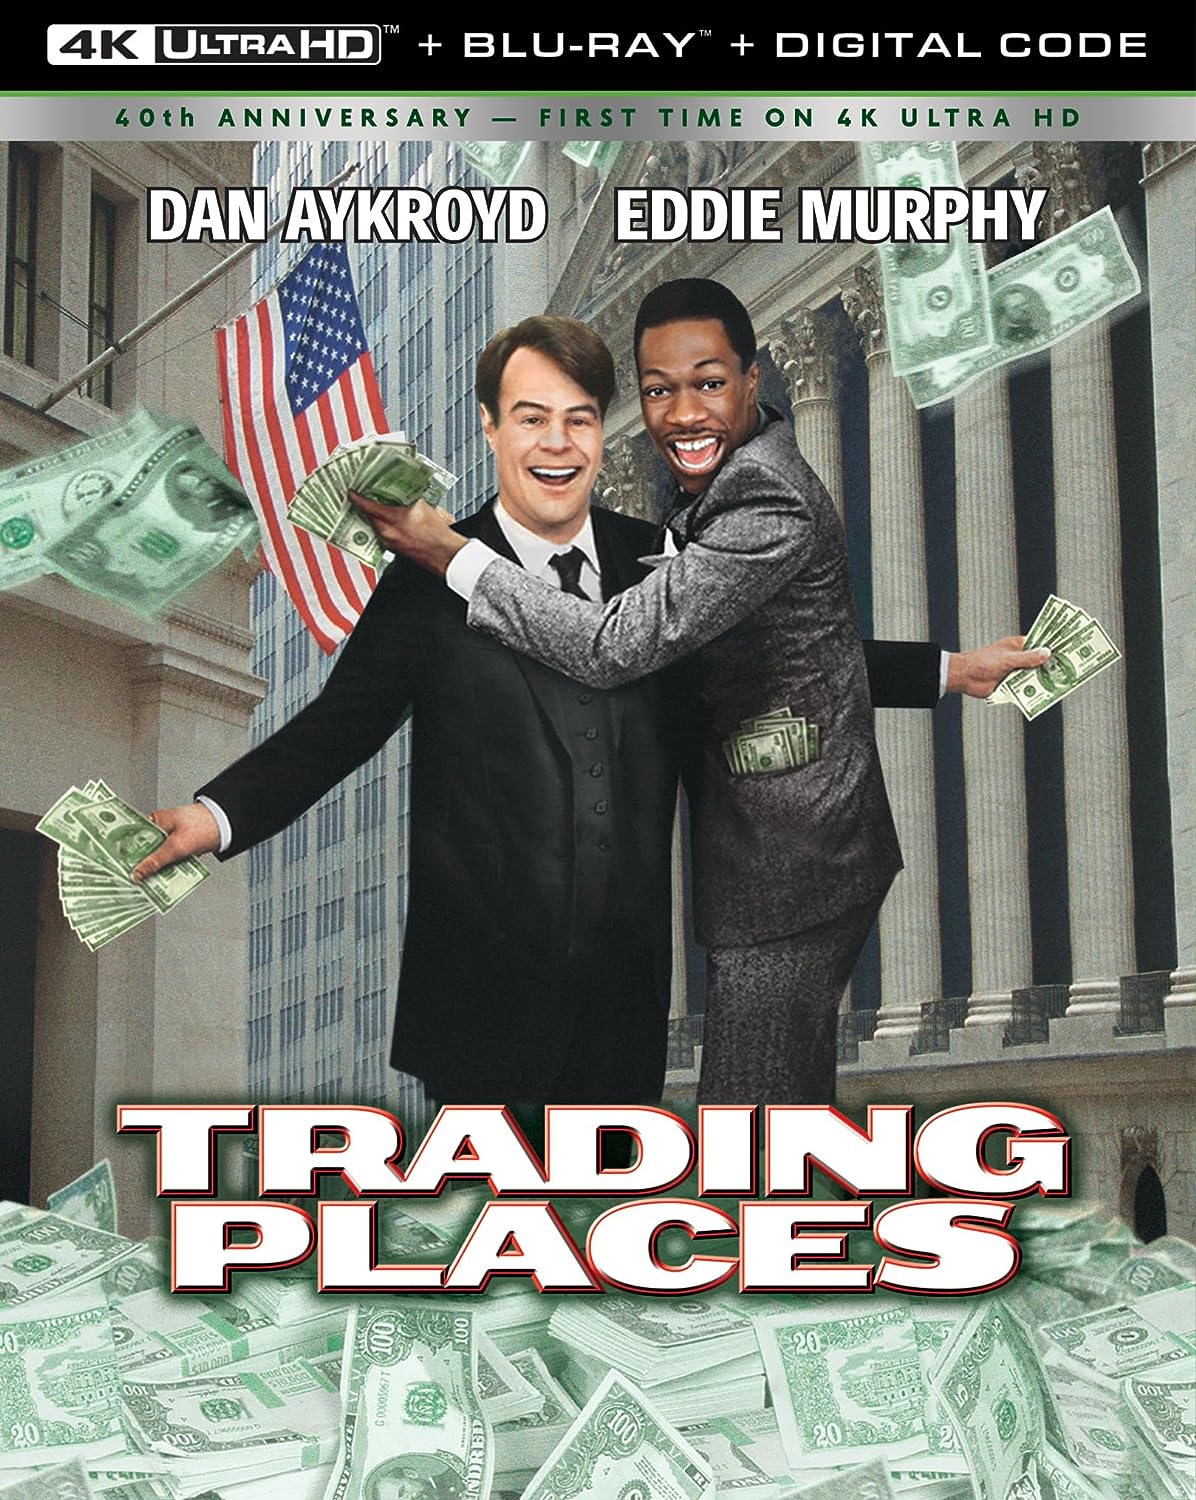 TRADING PLACES 4K UHD/BLU-RAY